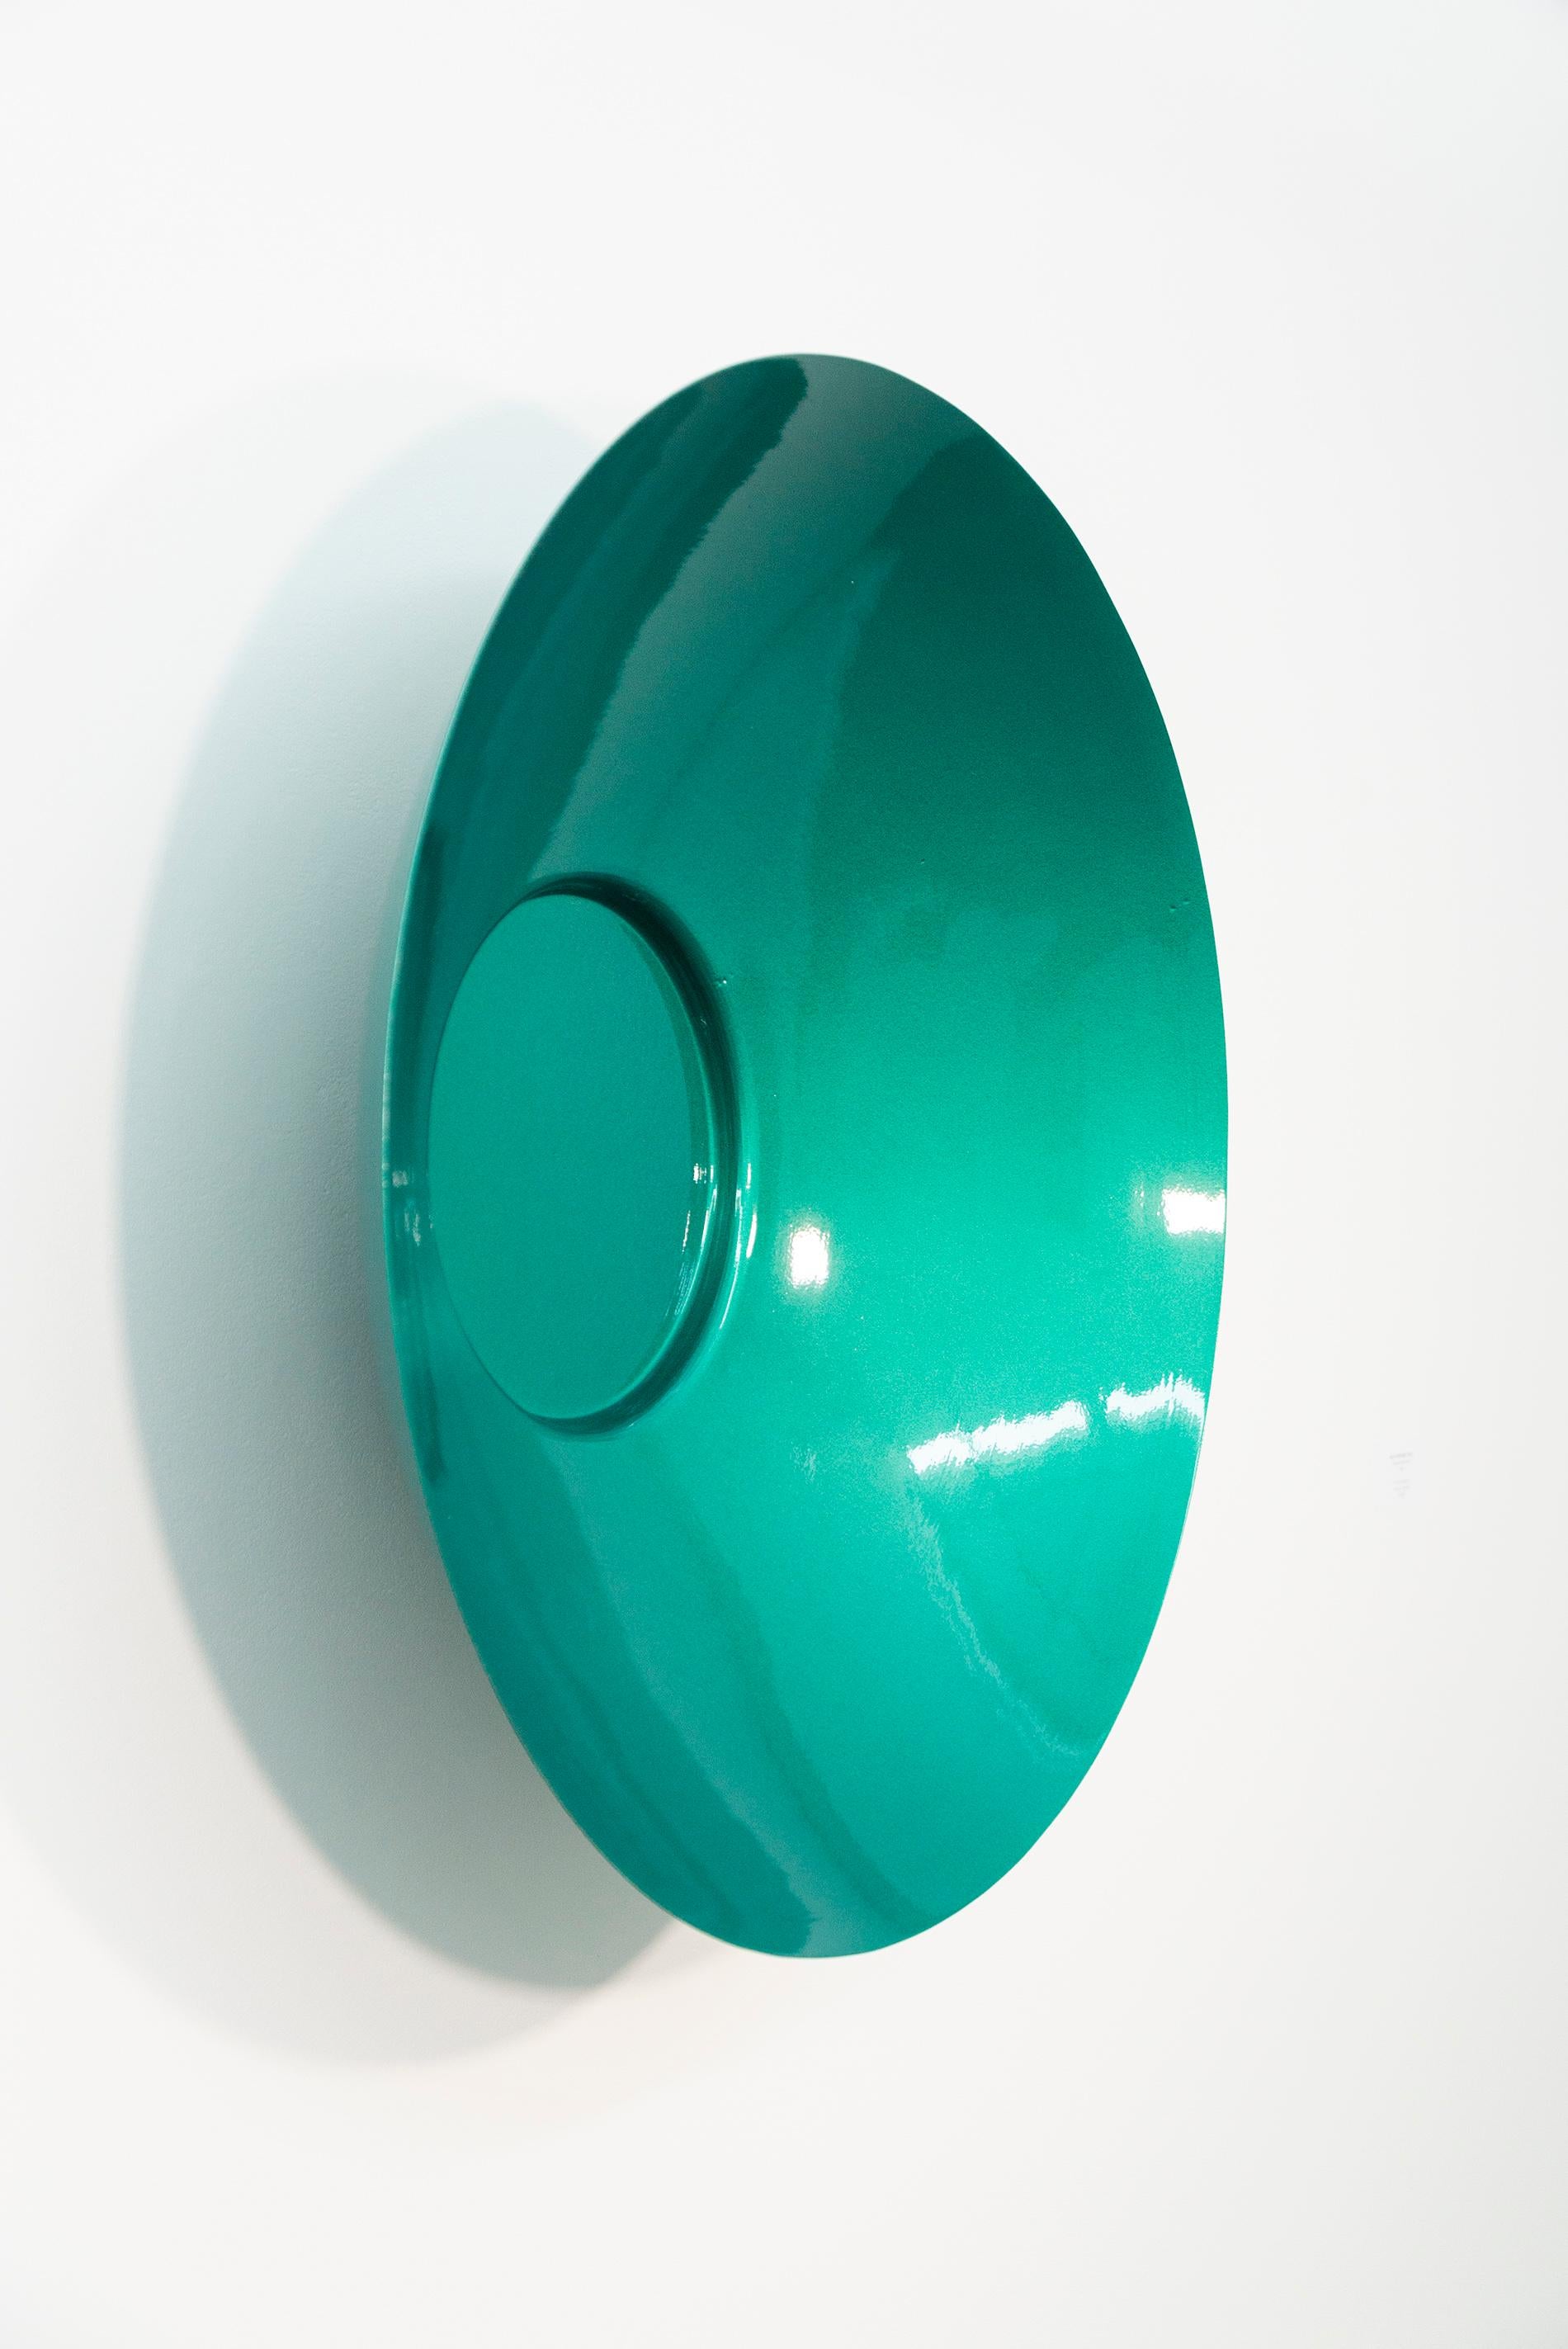 Singing Vessel Quetzal Green 32- circular, contemporary, steel wall sculpture For Sale 3